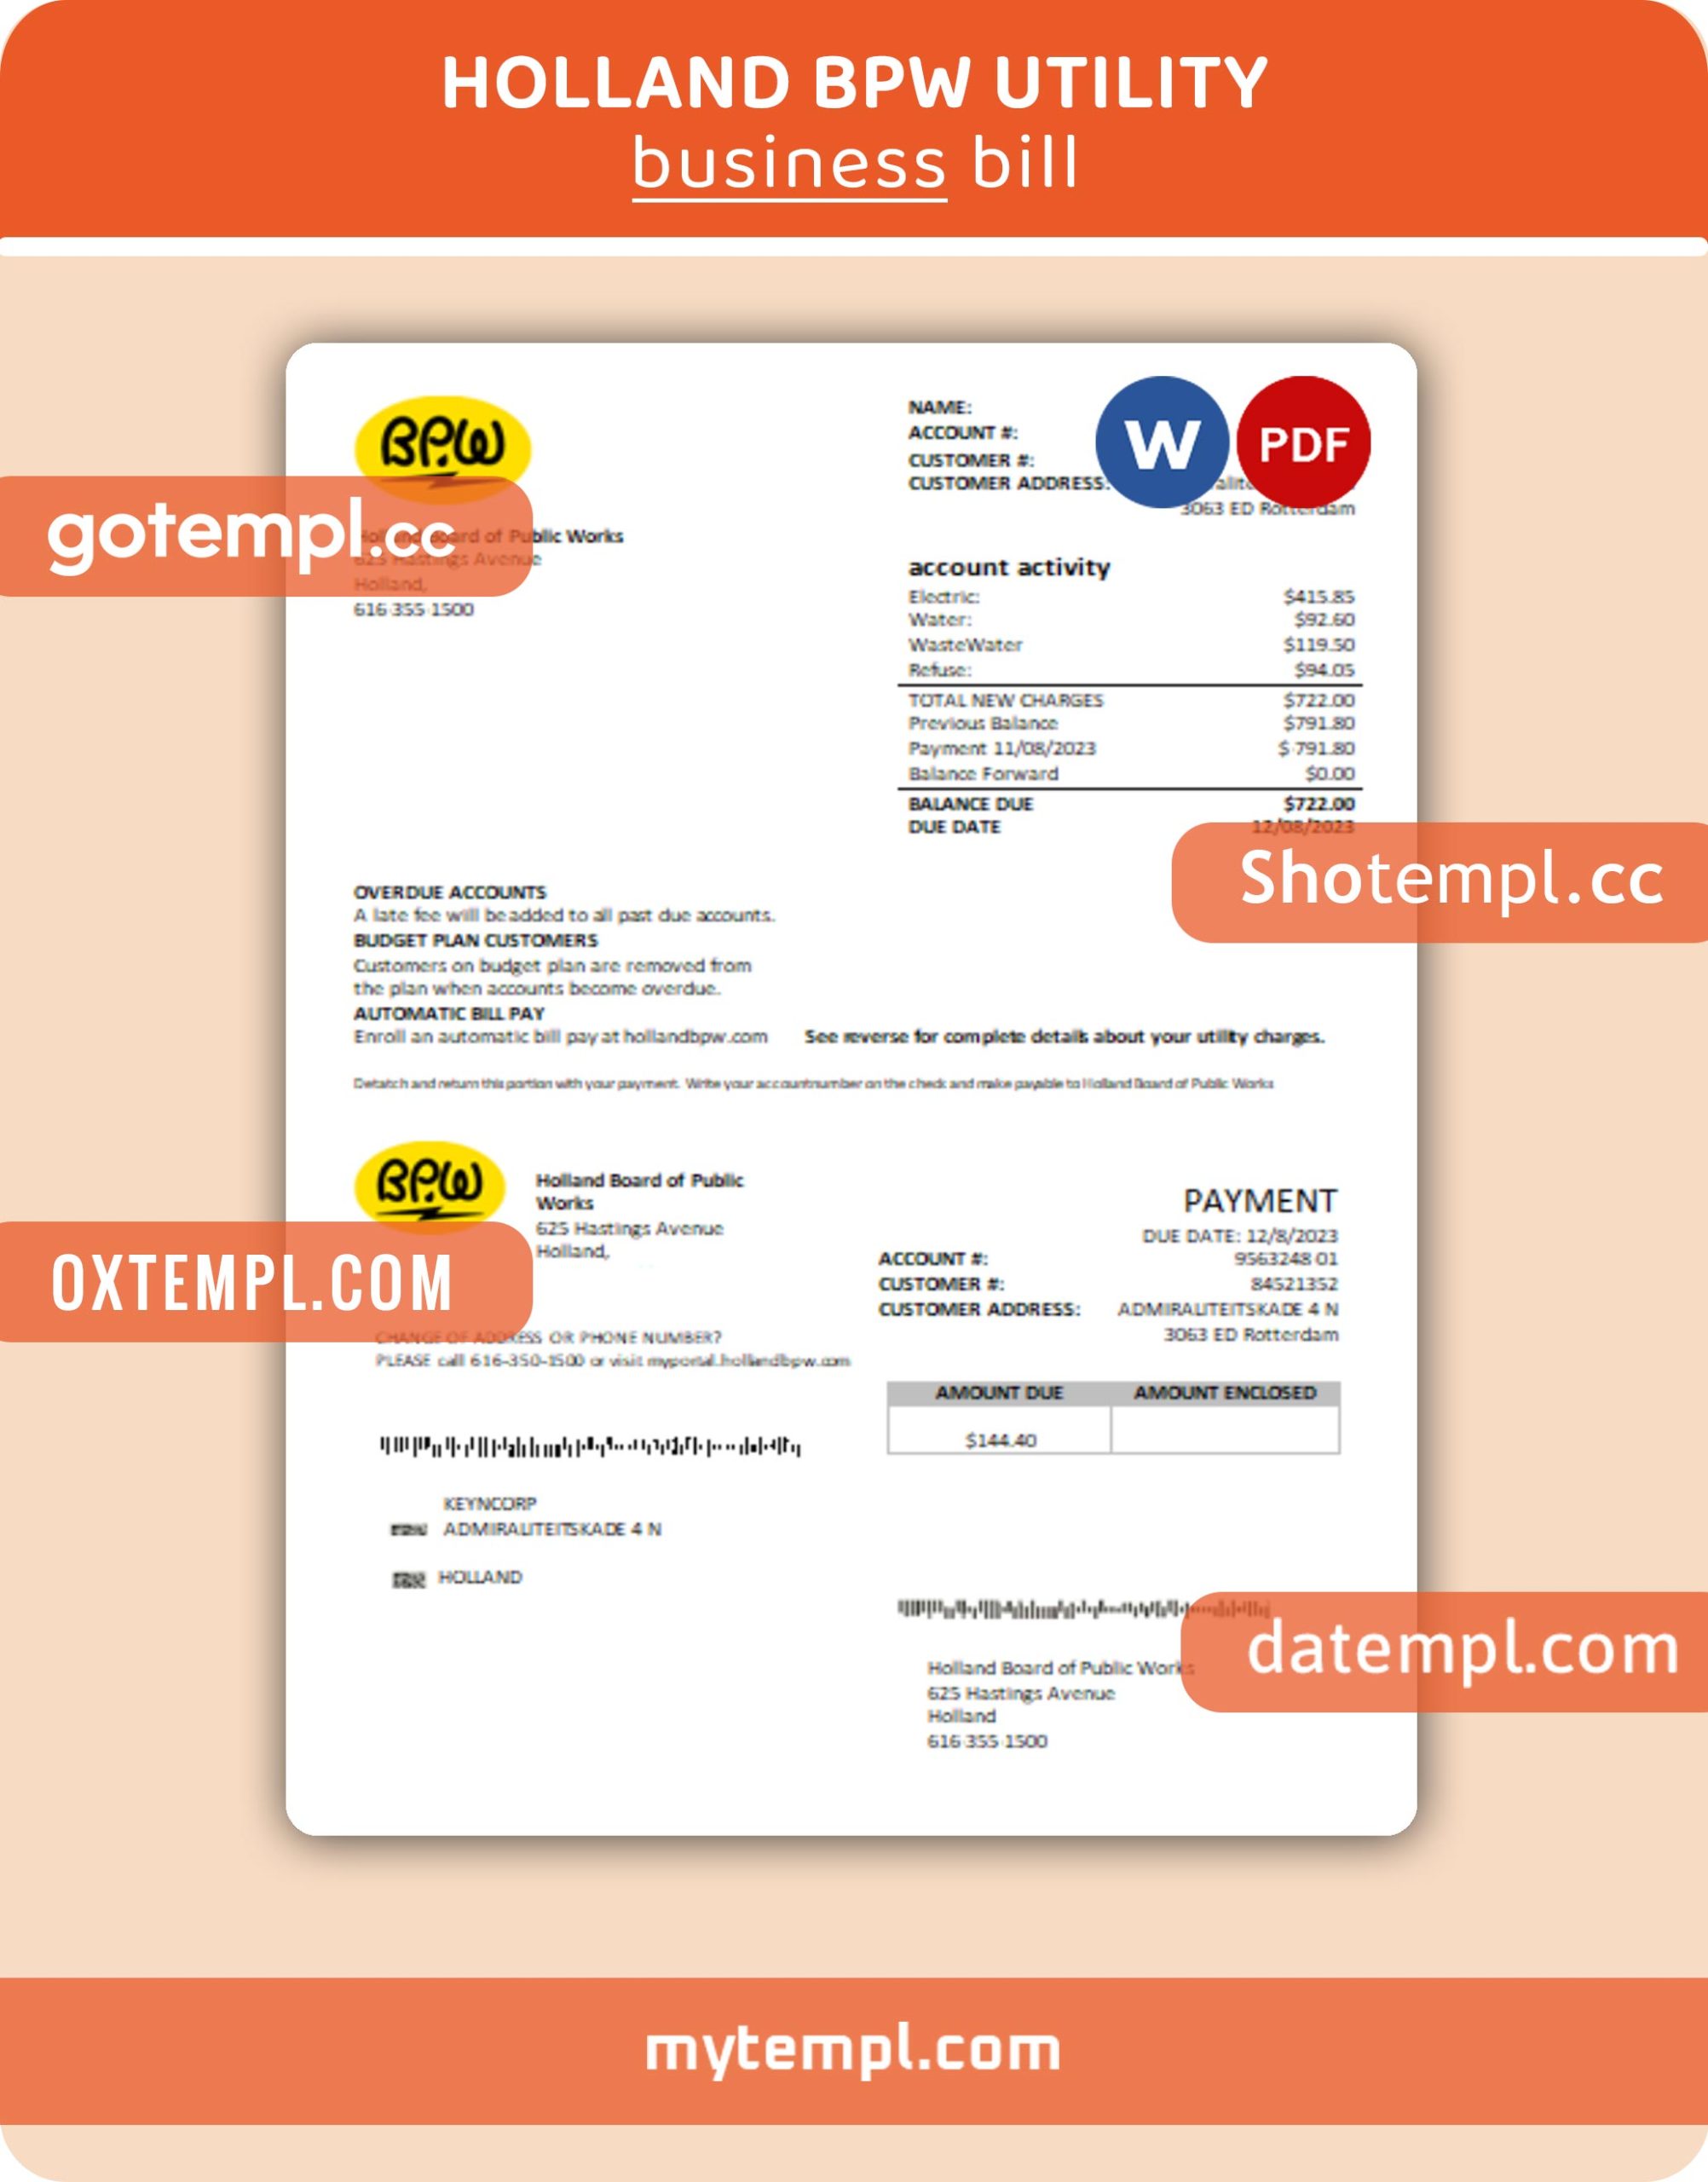 Holland BPW business utility bill, PDF and WORD template